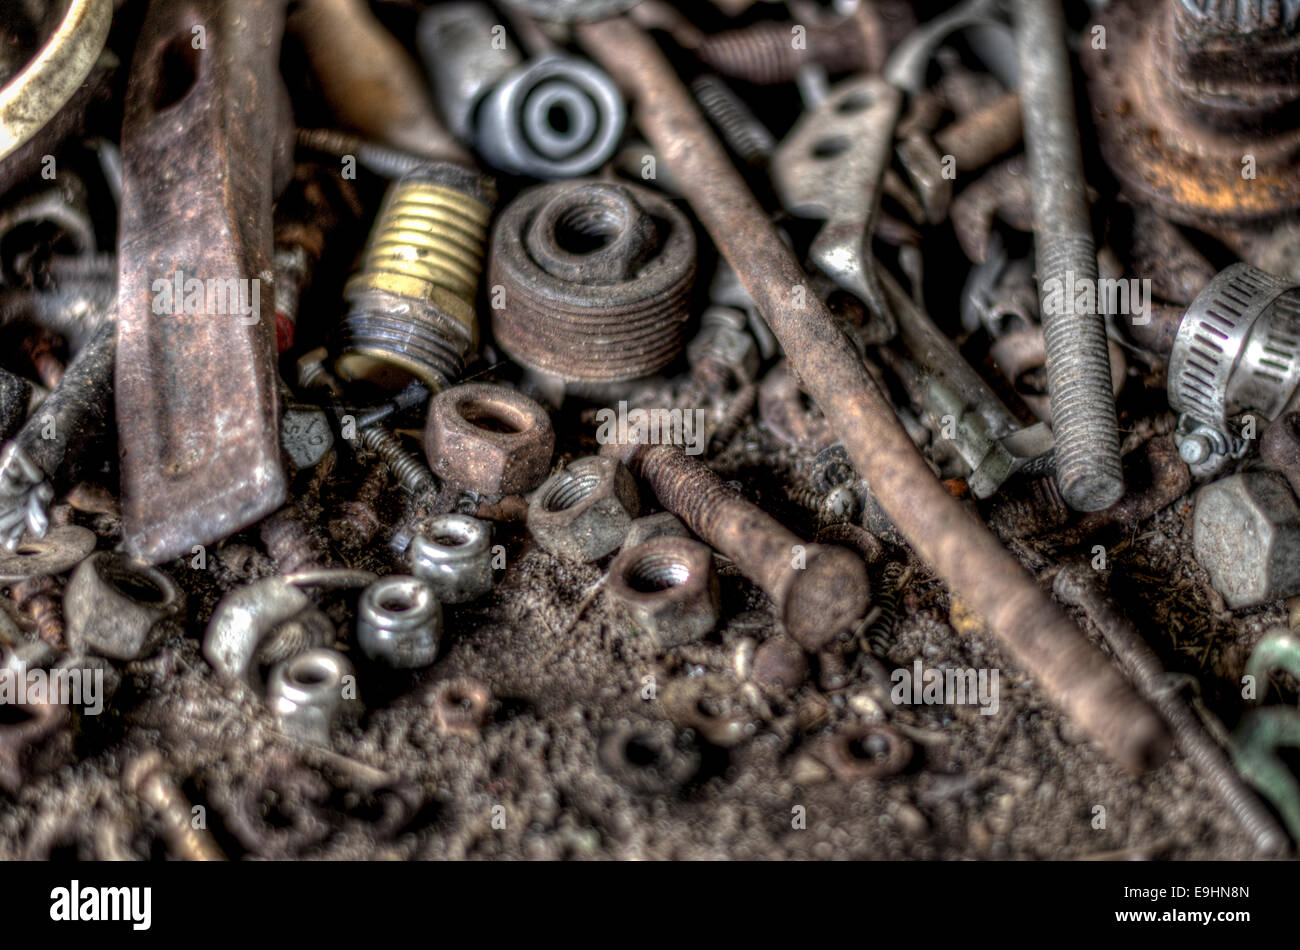 Various old and rusty nuts, bolts and tools on a work bench. Stock Photo